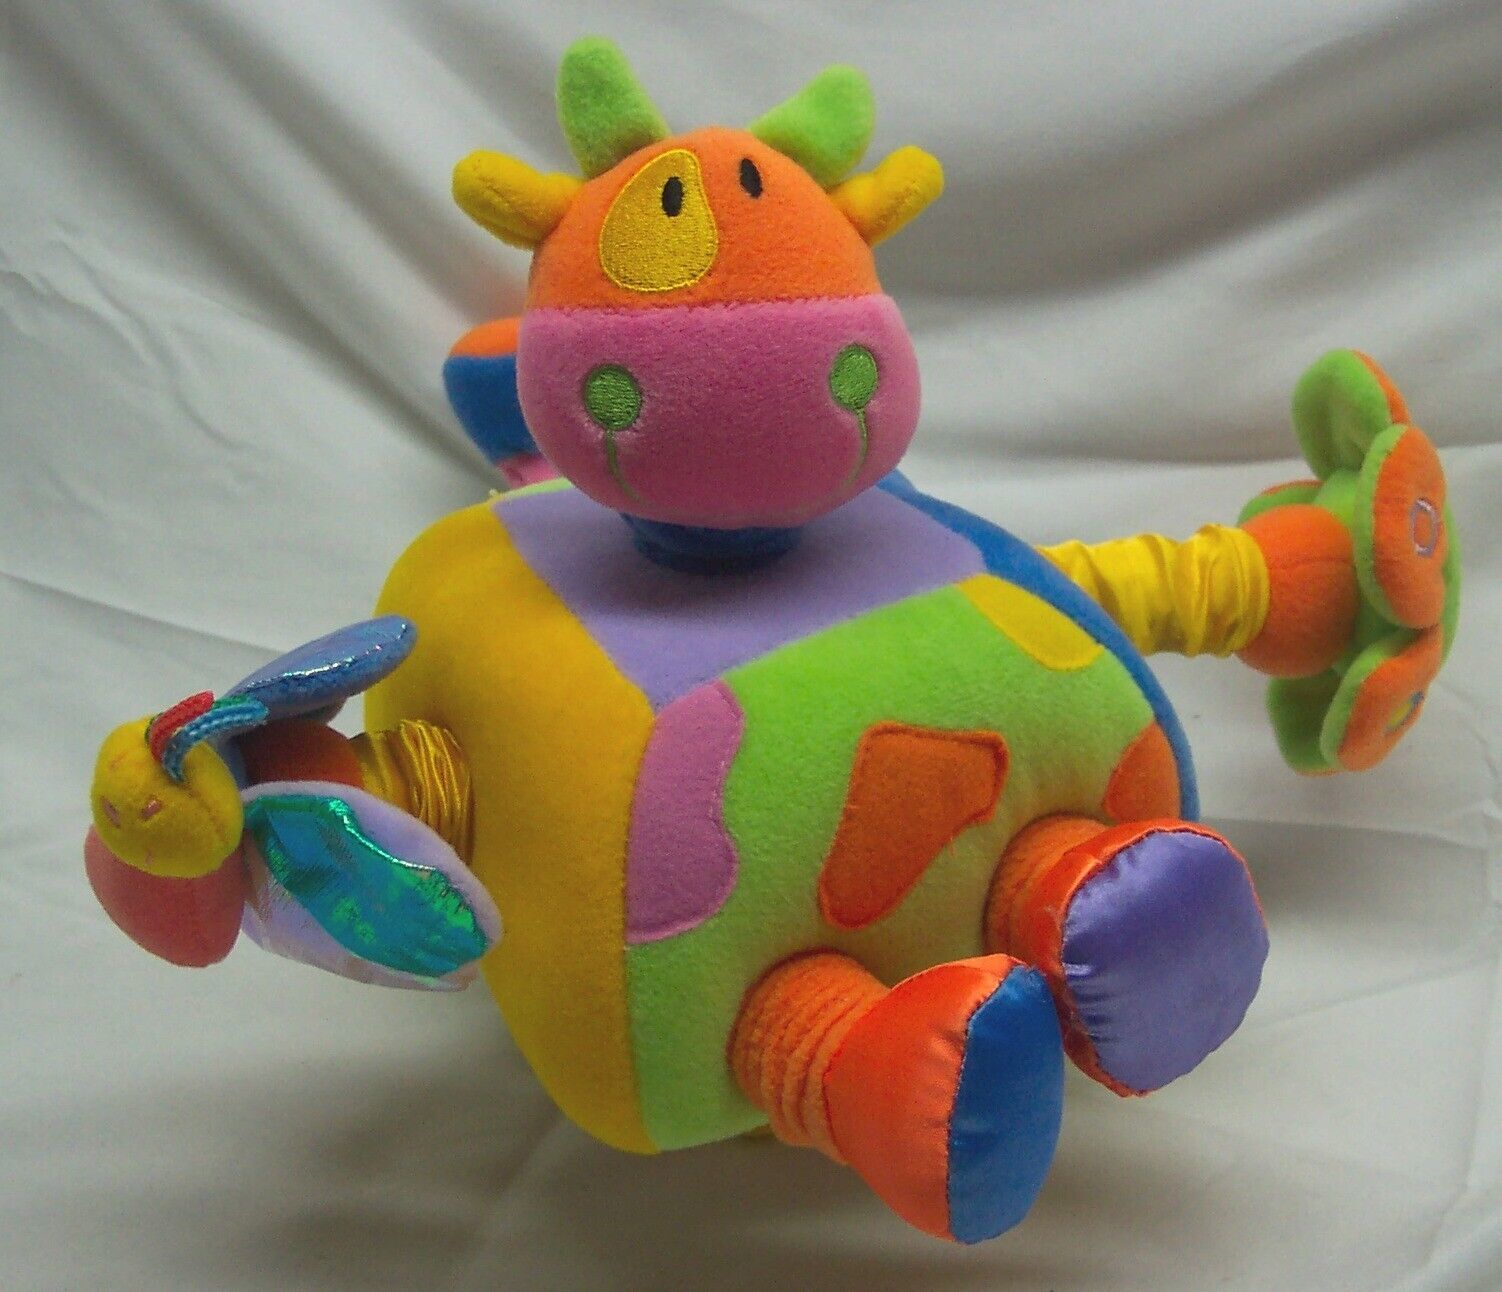 Cube-A-Loos COLORFUL ACTIVITY CUBE COW BABY RATTLE 8" Plush STUFFED ANIMAL TOY - $18.32